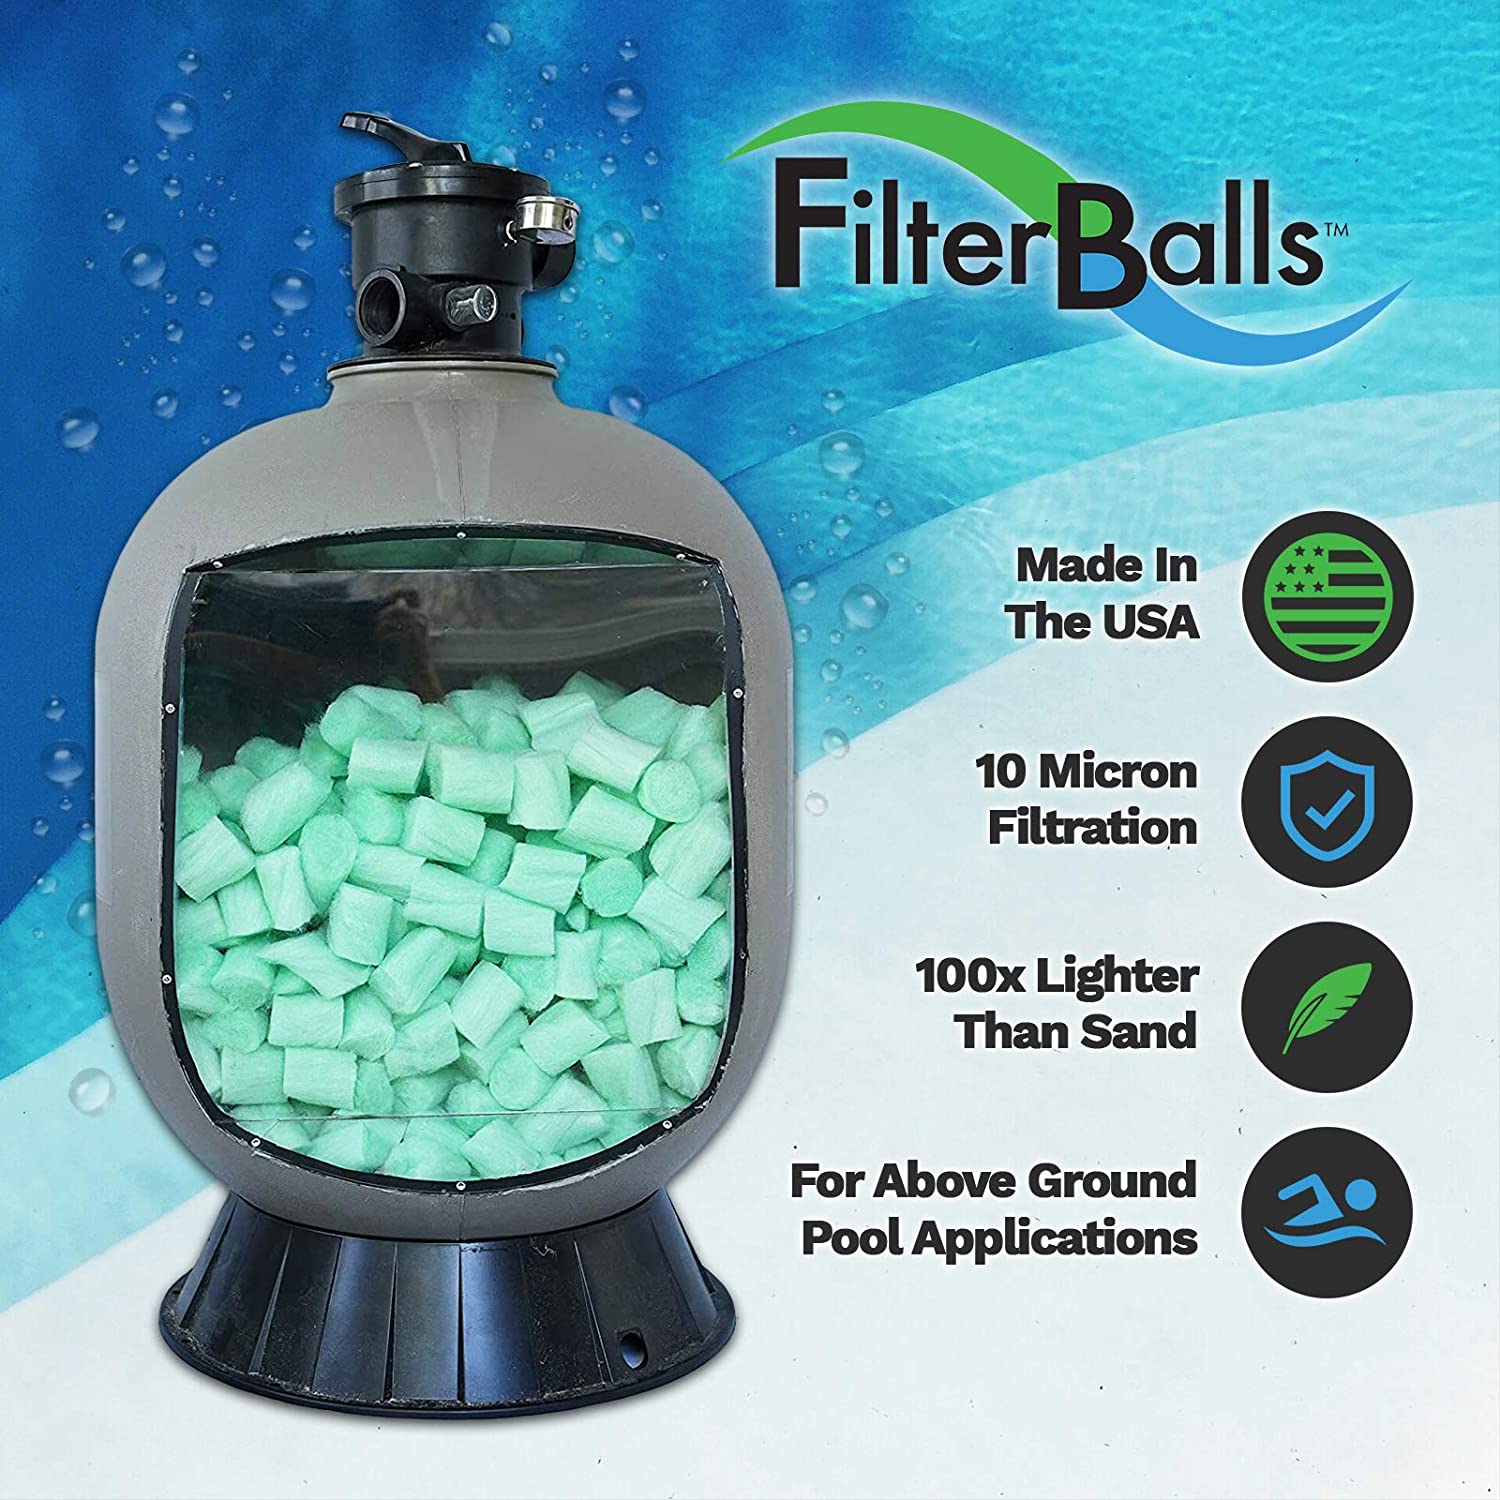 Filter Filter department at Pool Systems FilterBalls System Filter Pool in the Balls